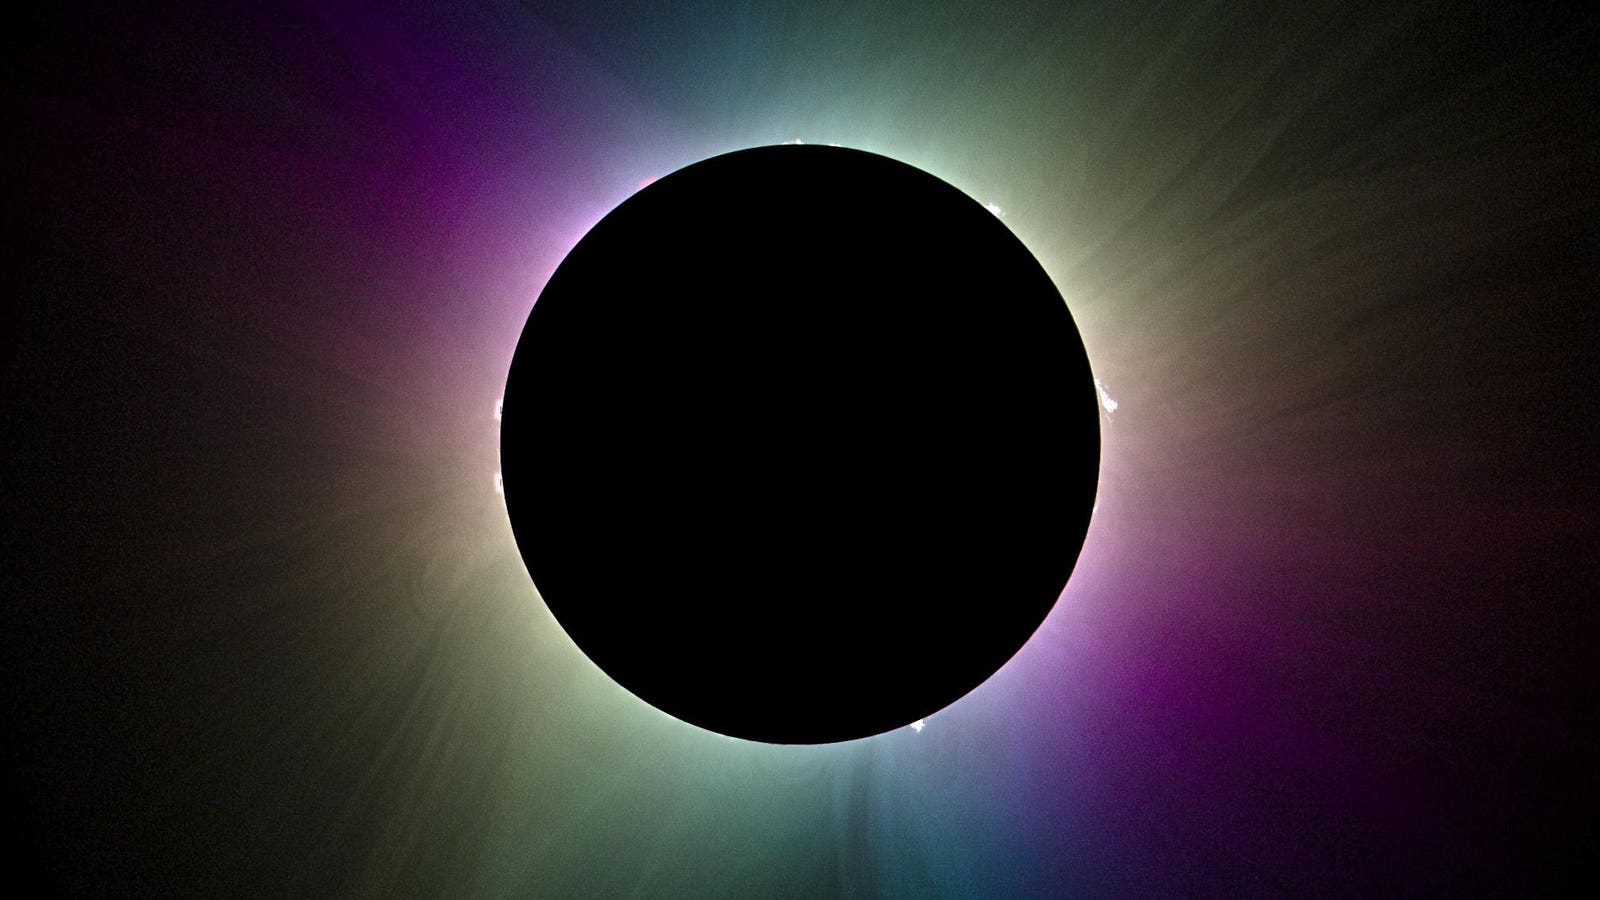 A strange new photo of a total solar eclipse sheds light on the mysteries of the sun